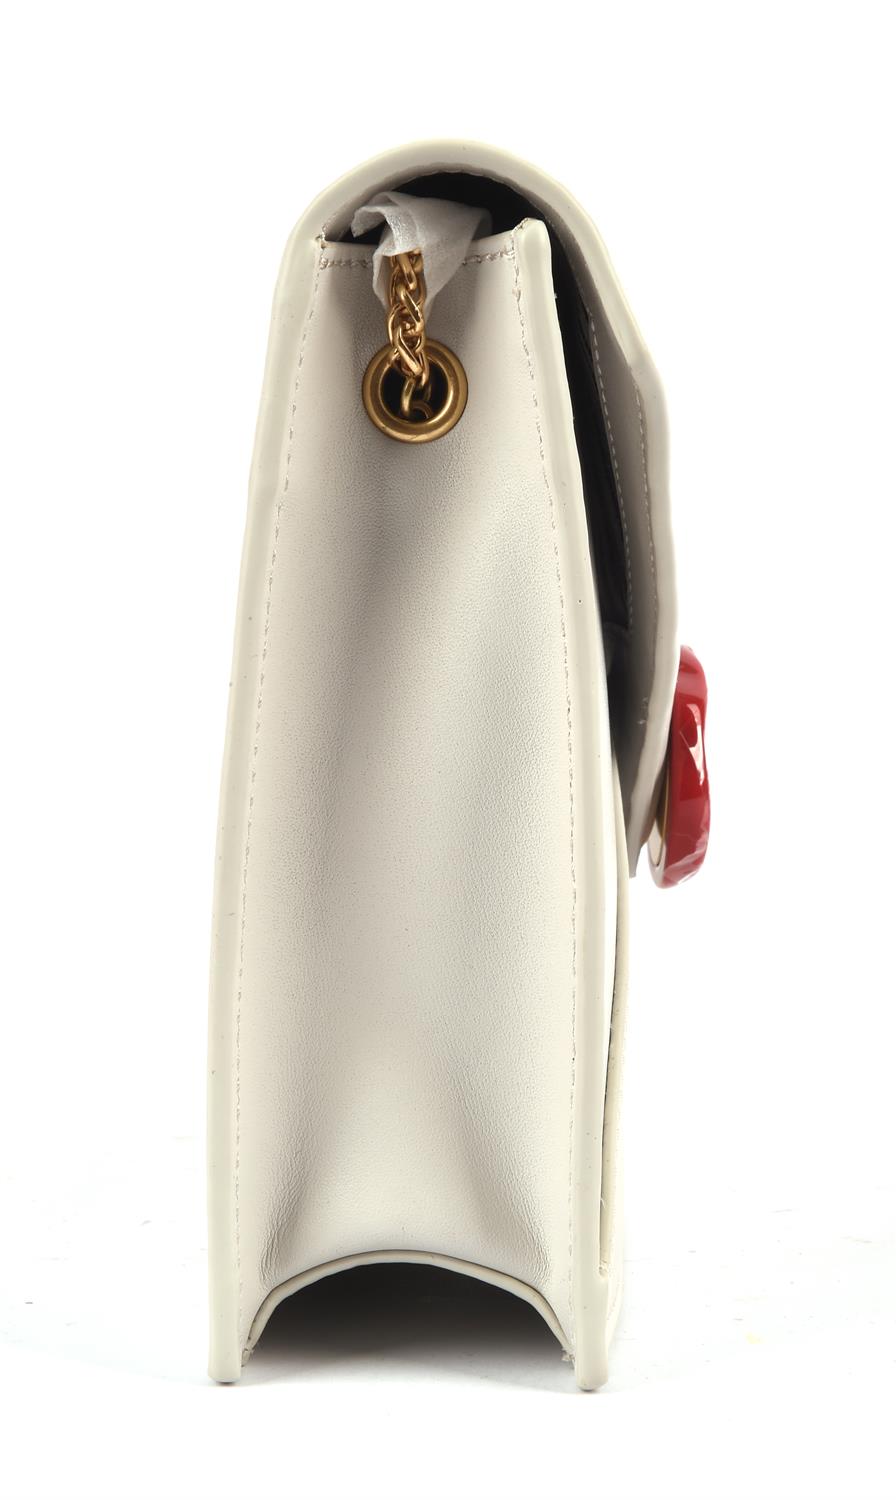 LULU GUINNESS dove-grey envelope clutch bag with long gold coloured chain unused with label and - Image 4 of 6